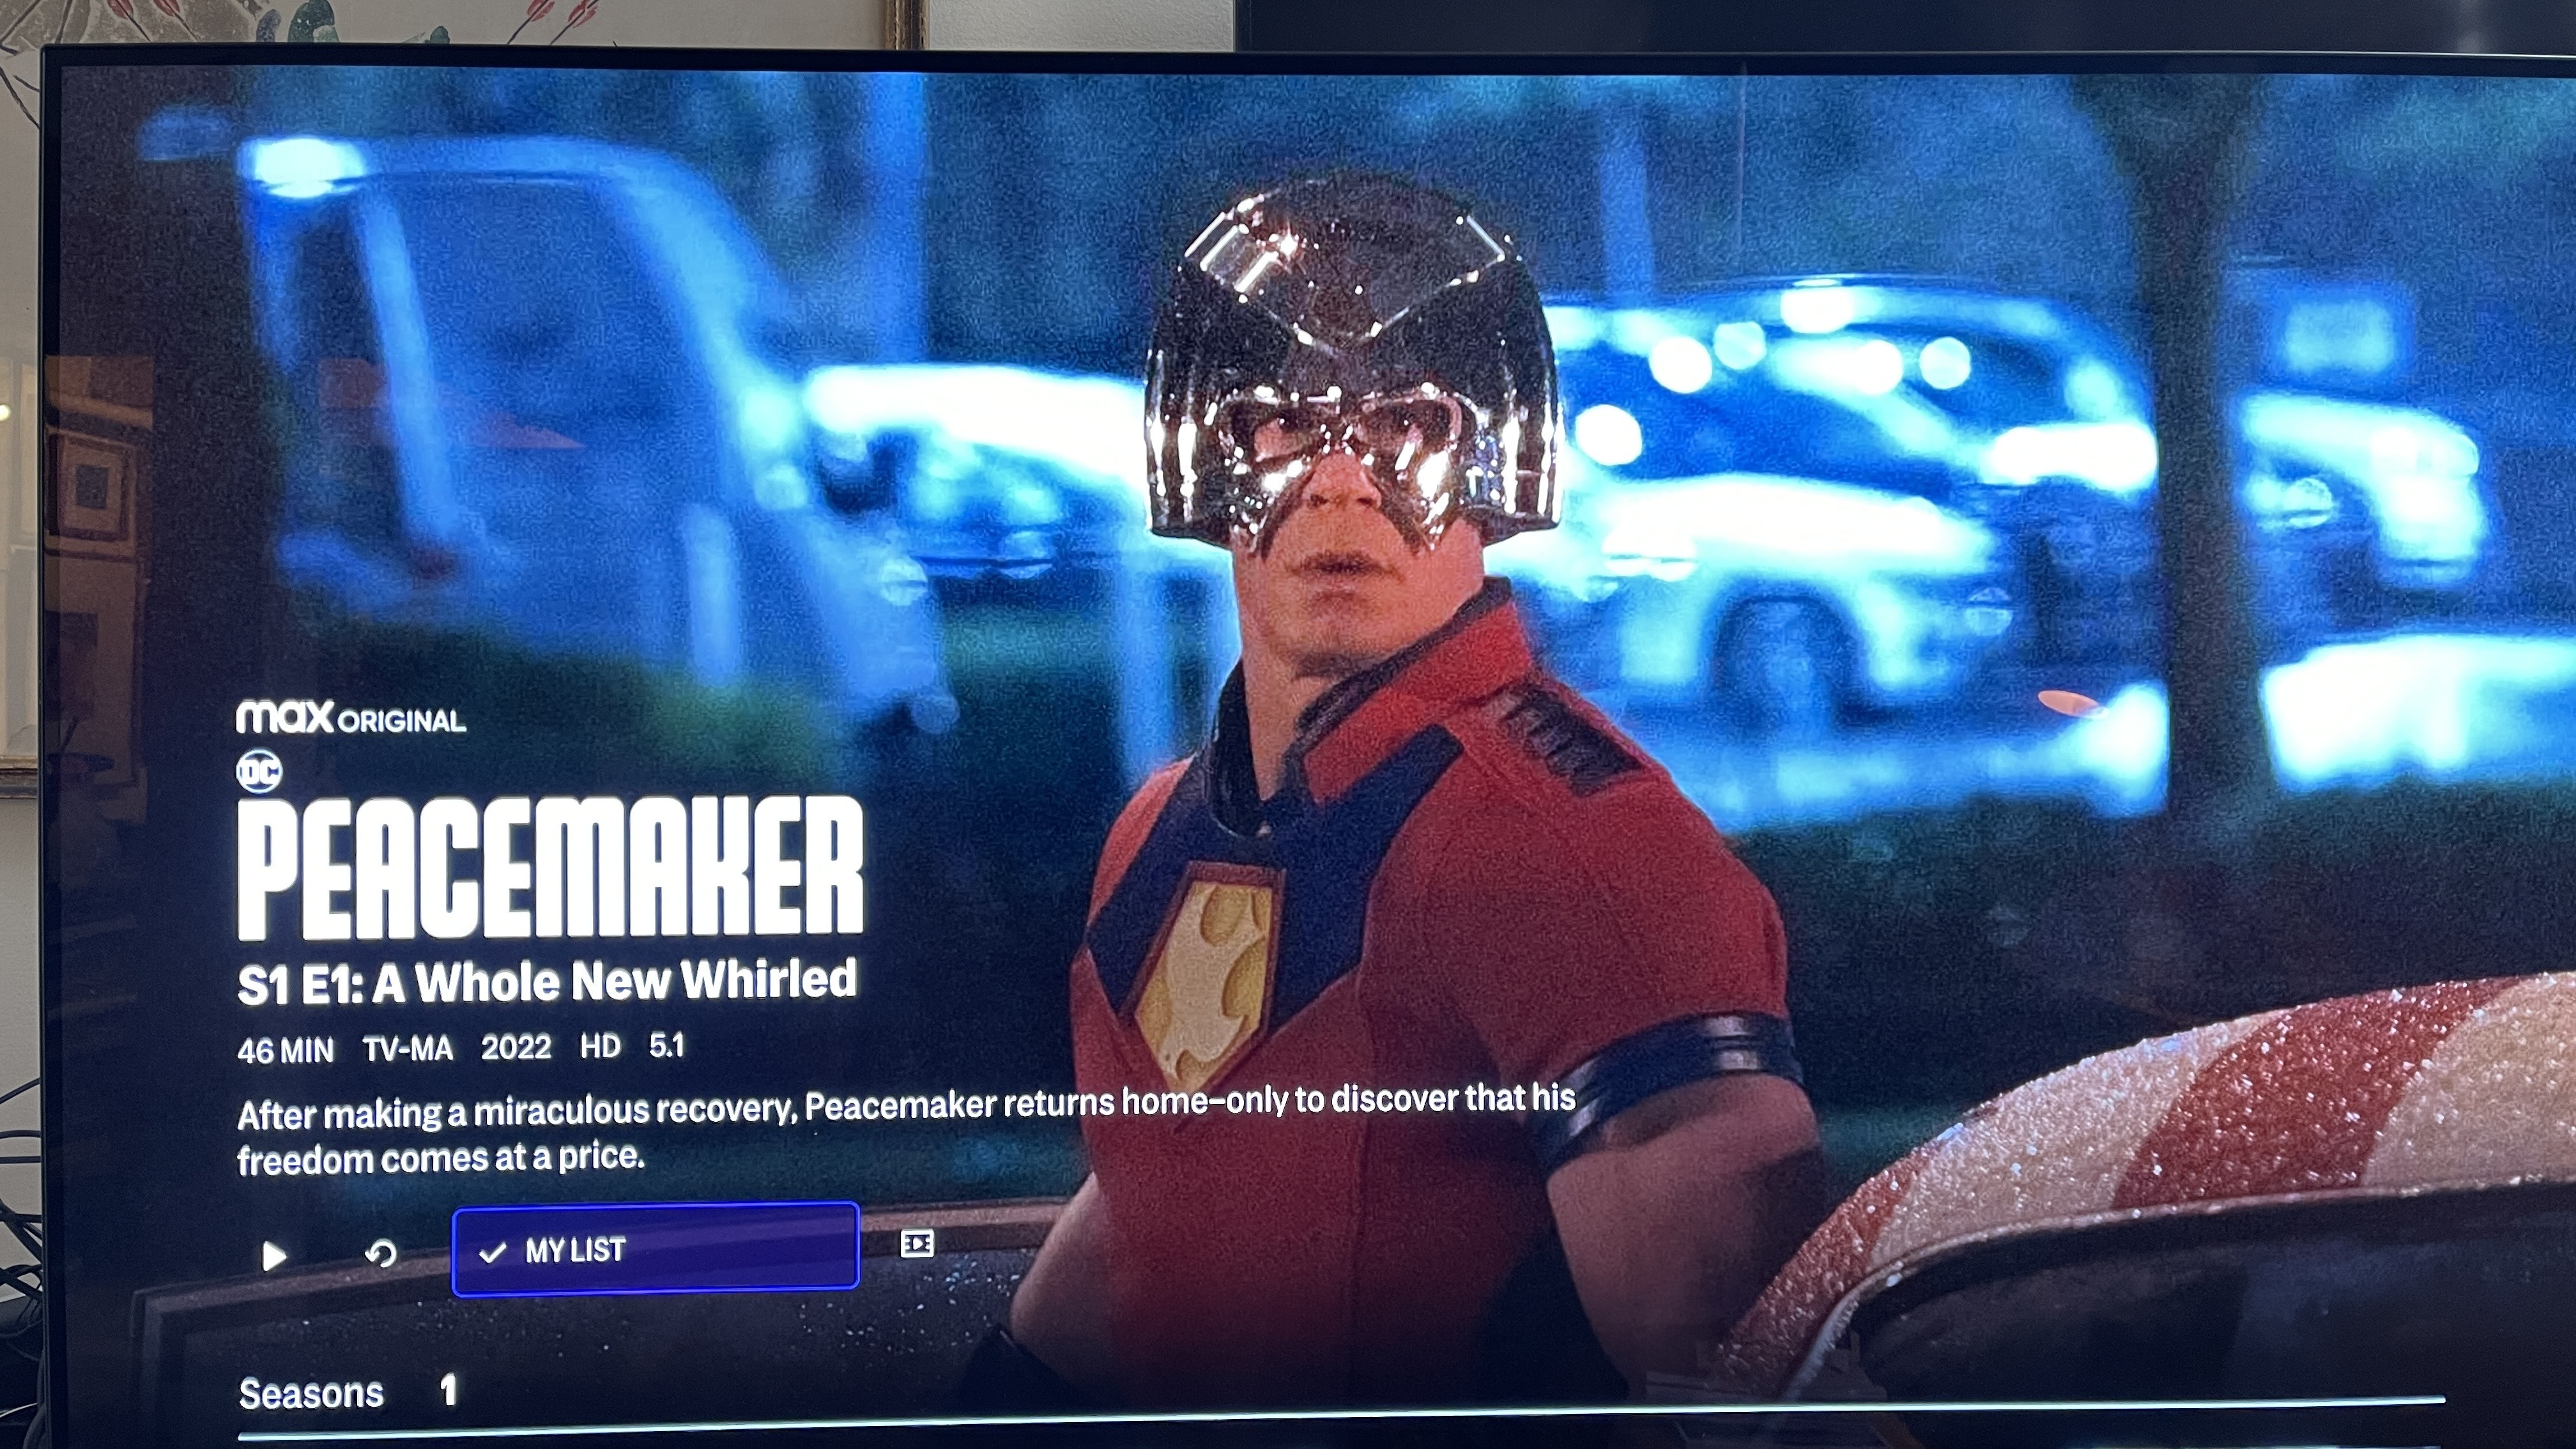 The new HBO Max app tested on Apple TV 4K